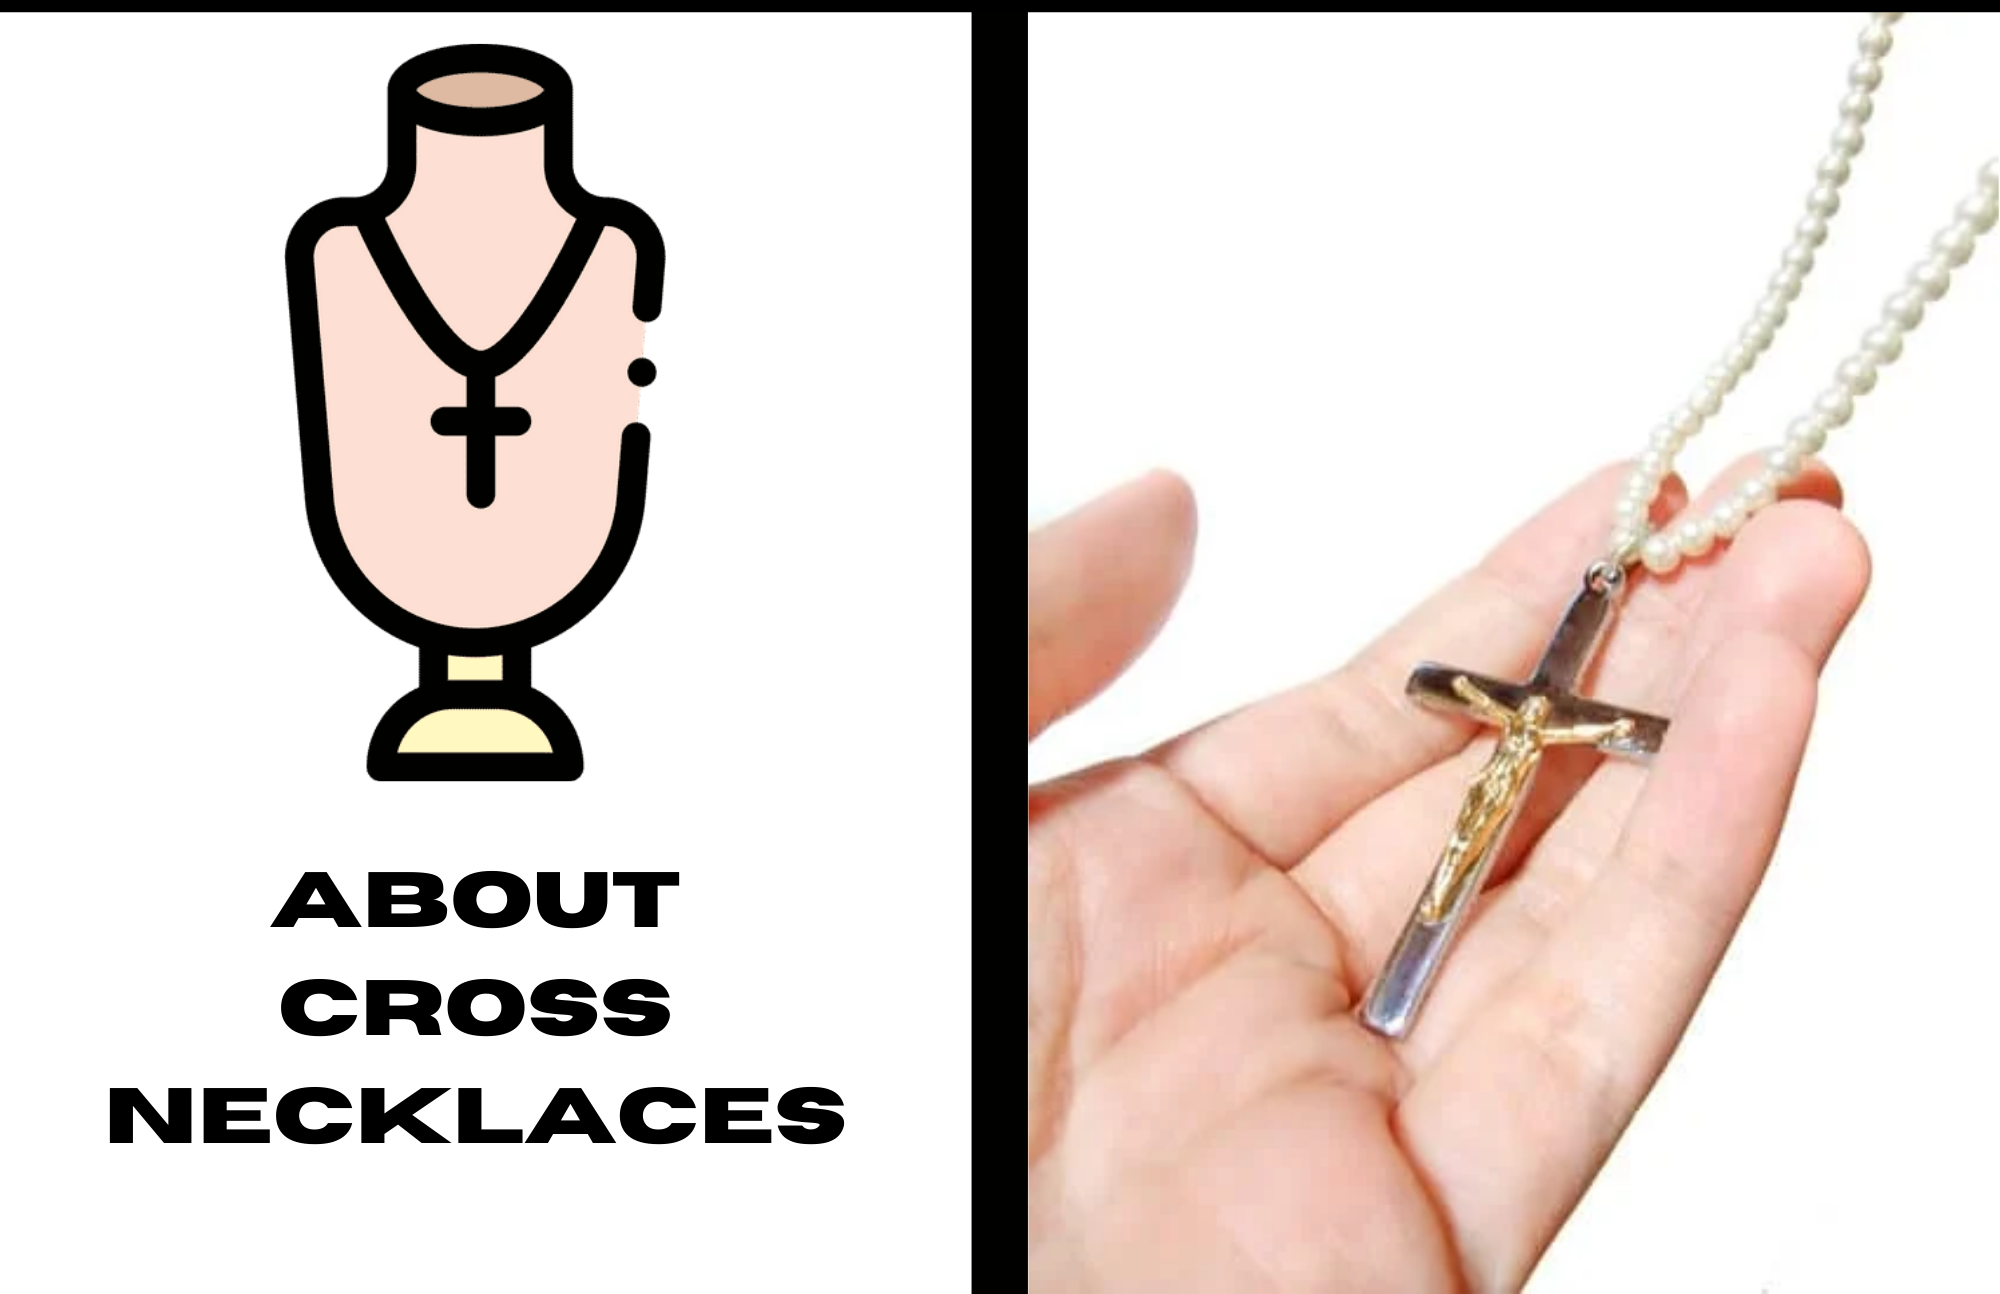 The Three Cross Necklaces For Women - What You Should Know About Wearing It